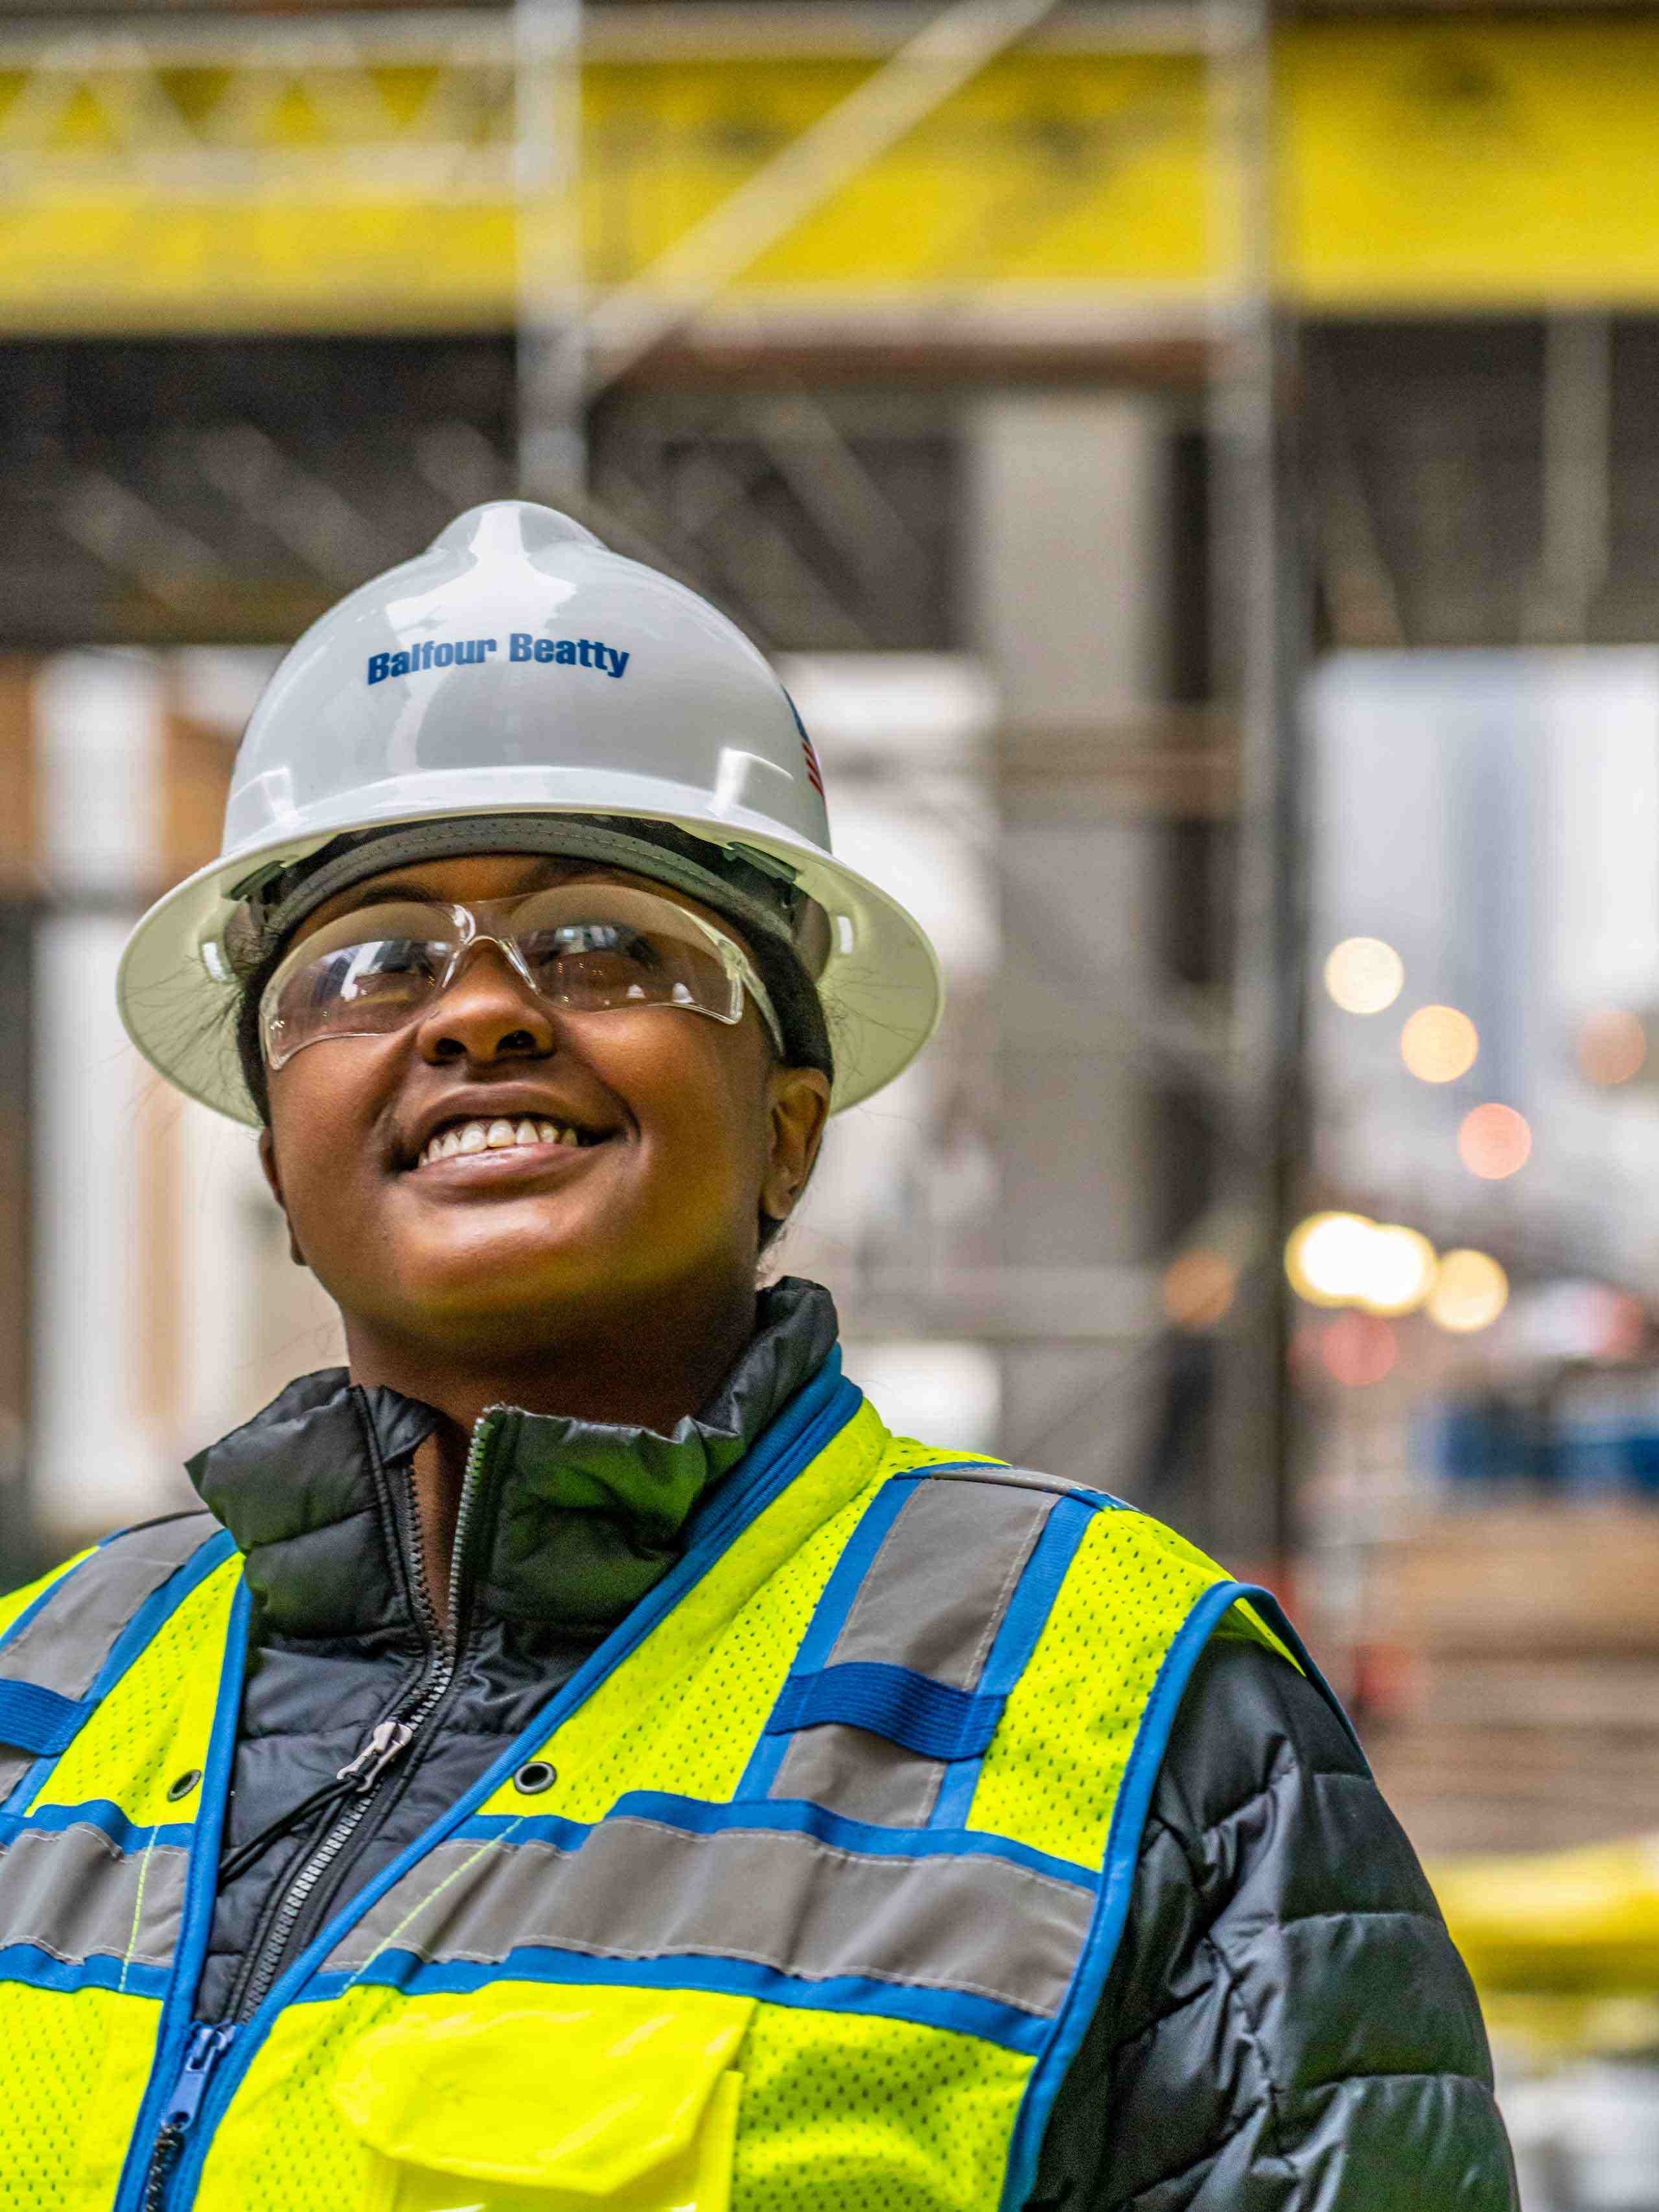 Build a Successful Career for Women in the Construction Industry